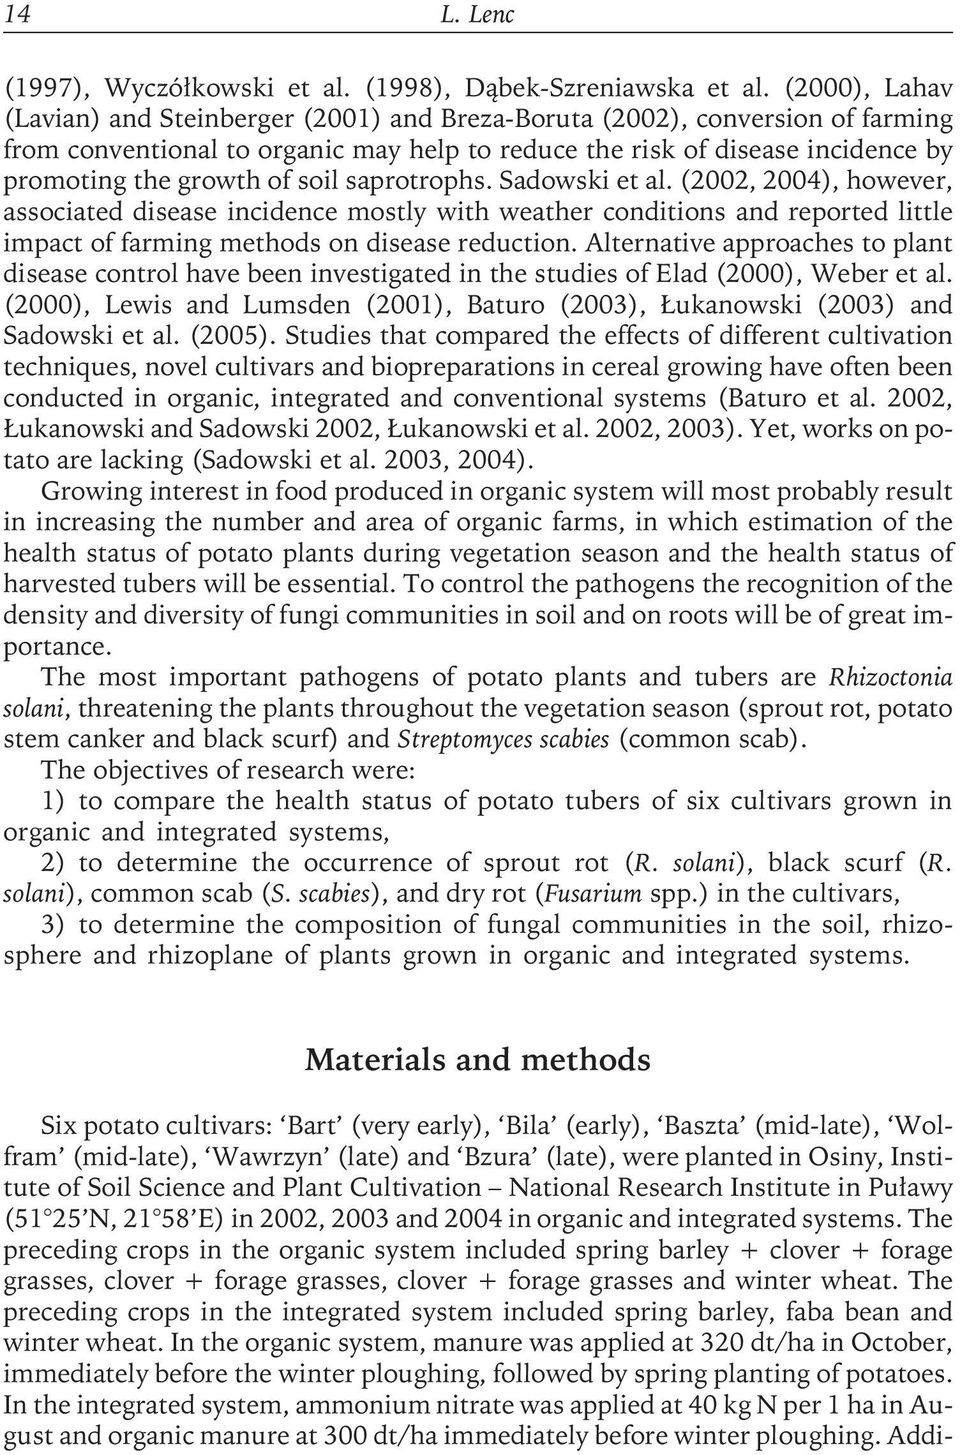 soil saprotrophs. Sadowski et al. (2002, 2004), however, associated disease incidence mostly with weather conditions and reported little impact of farming methods on disease reduction.